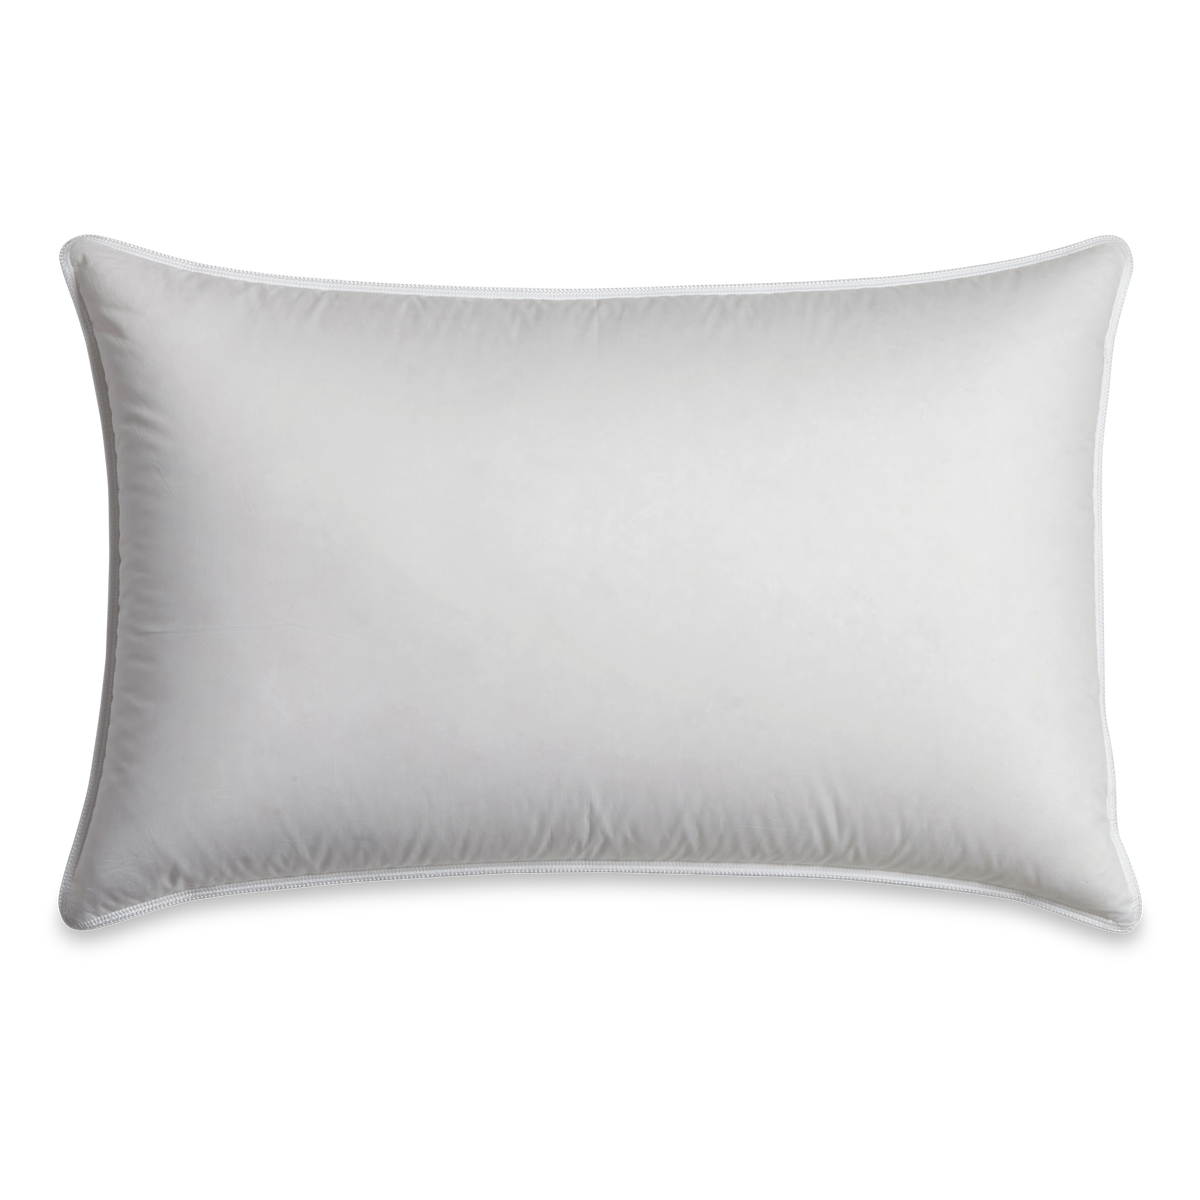 This pillow is made with a Downpass-certified, hypoallergenic white down and feather blend that is sourced from the cold weather climates of Europe and produced in Canada.